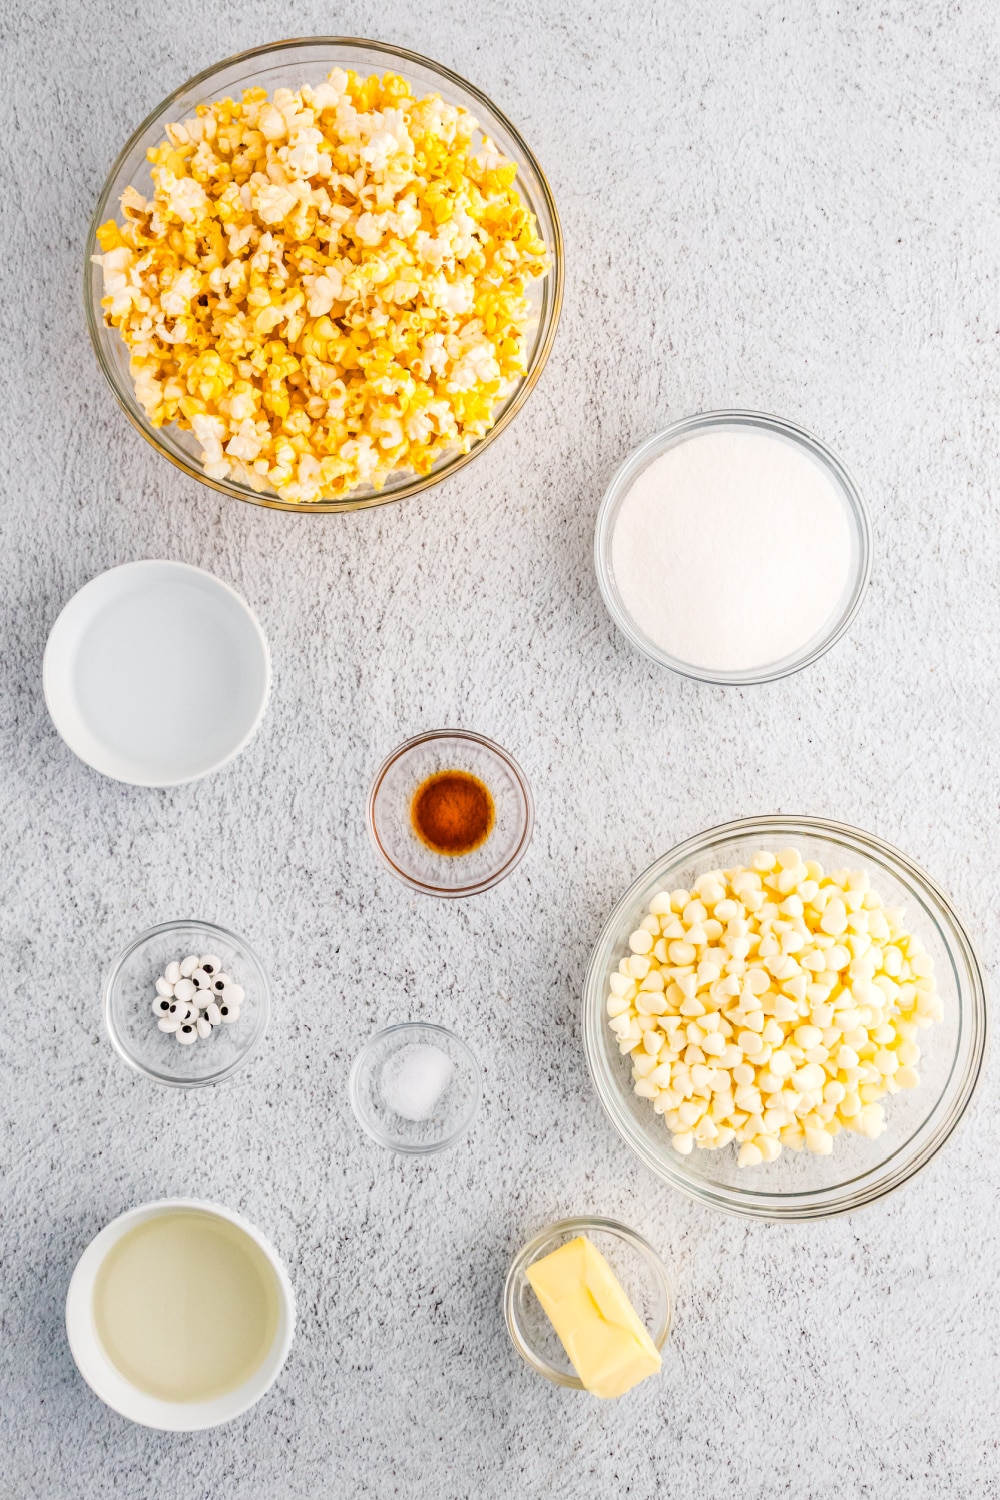 Ingredients needed for this recipe measured and presented in clear glass bowls on a white countertop.